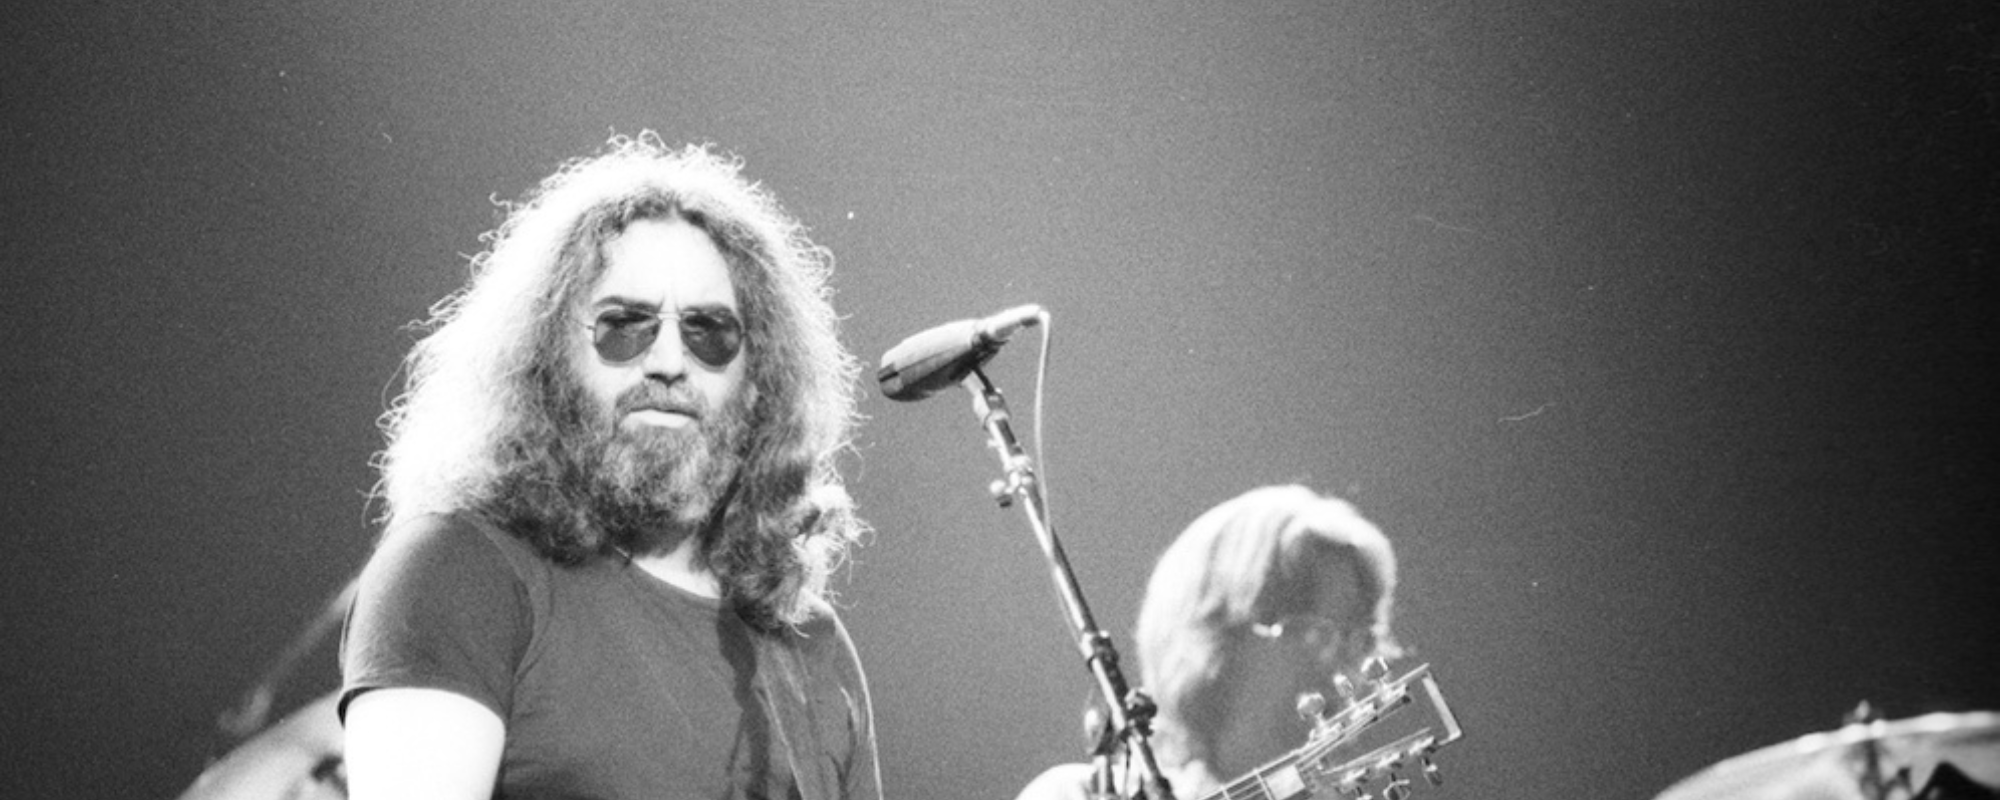 New Auction Offers Rare and Curated Items from the Grateful Dead Including Art, Photos, Instruments, and More